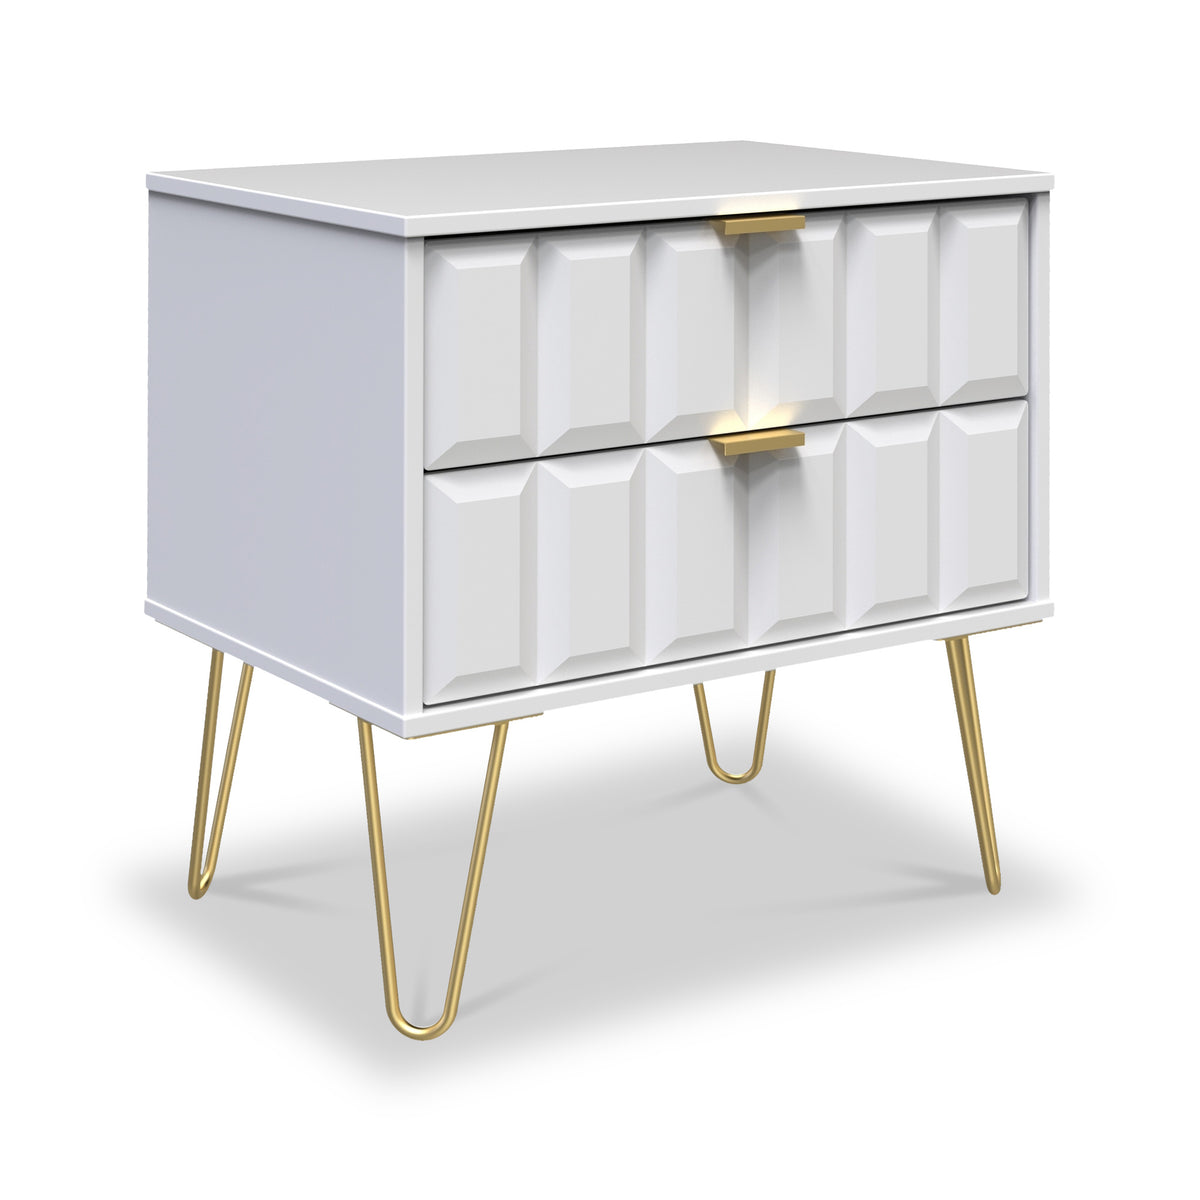 Harlow White 2 Drawer Utility Chest with Gold Hairpin Legs from Roseland